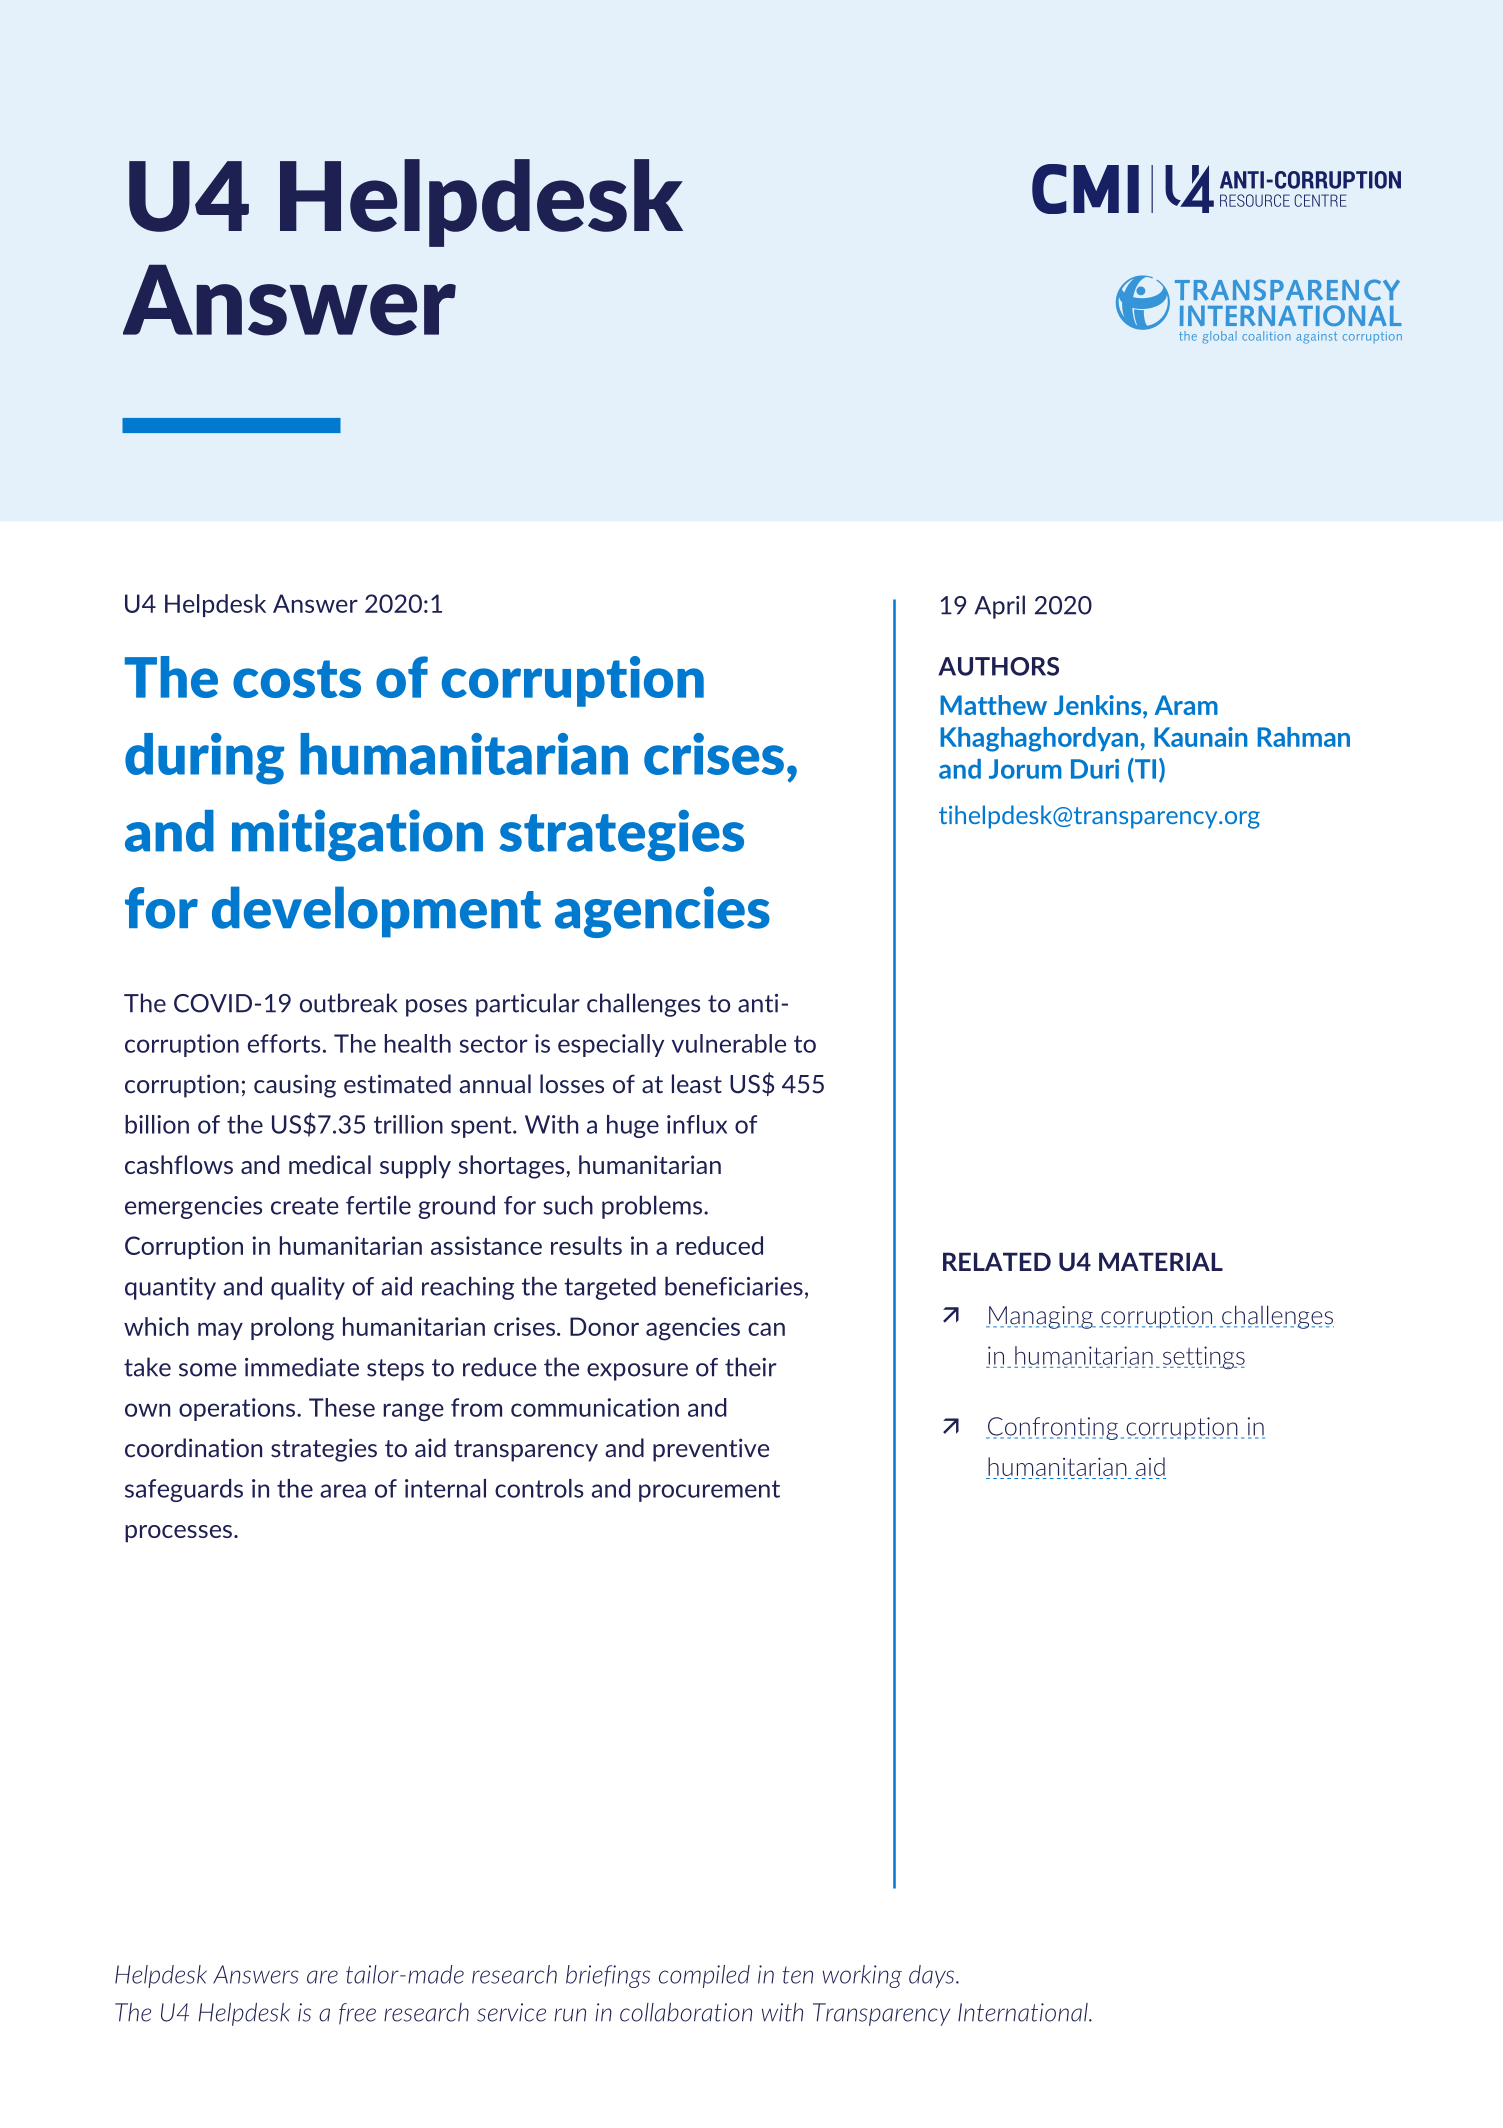 The costs of corruption during humanitarian crises, and mitigation strategies for development agencies